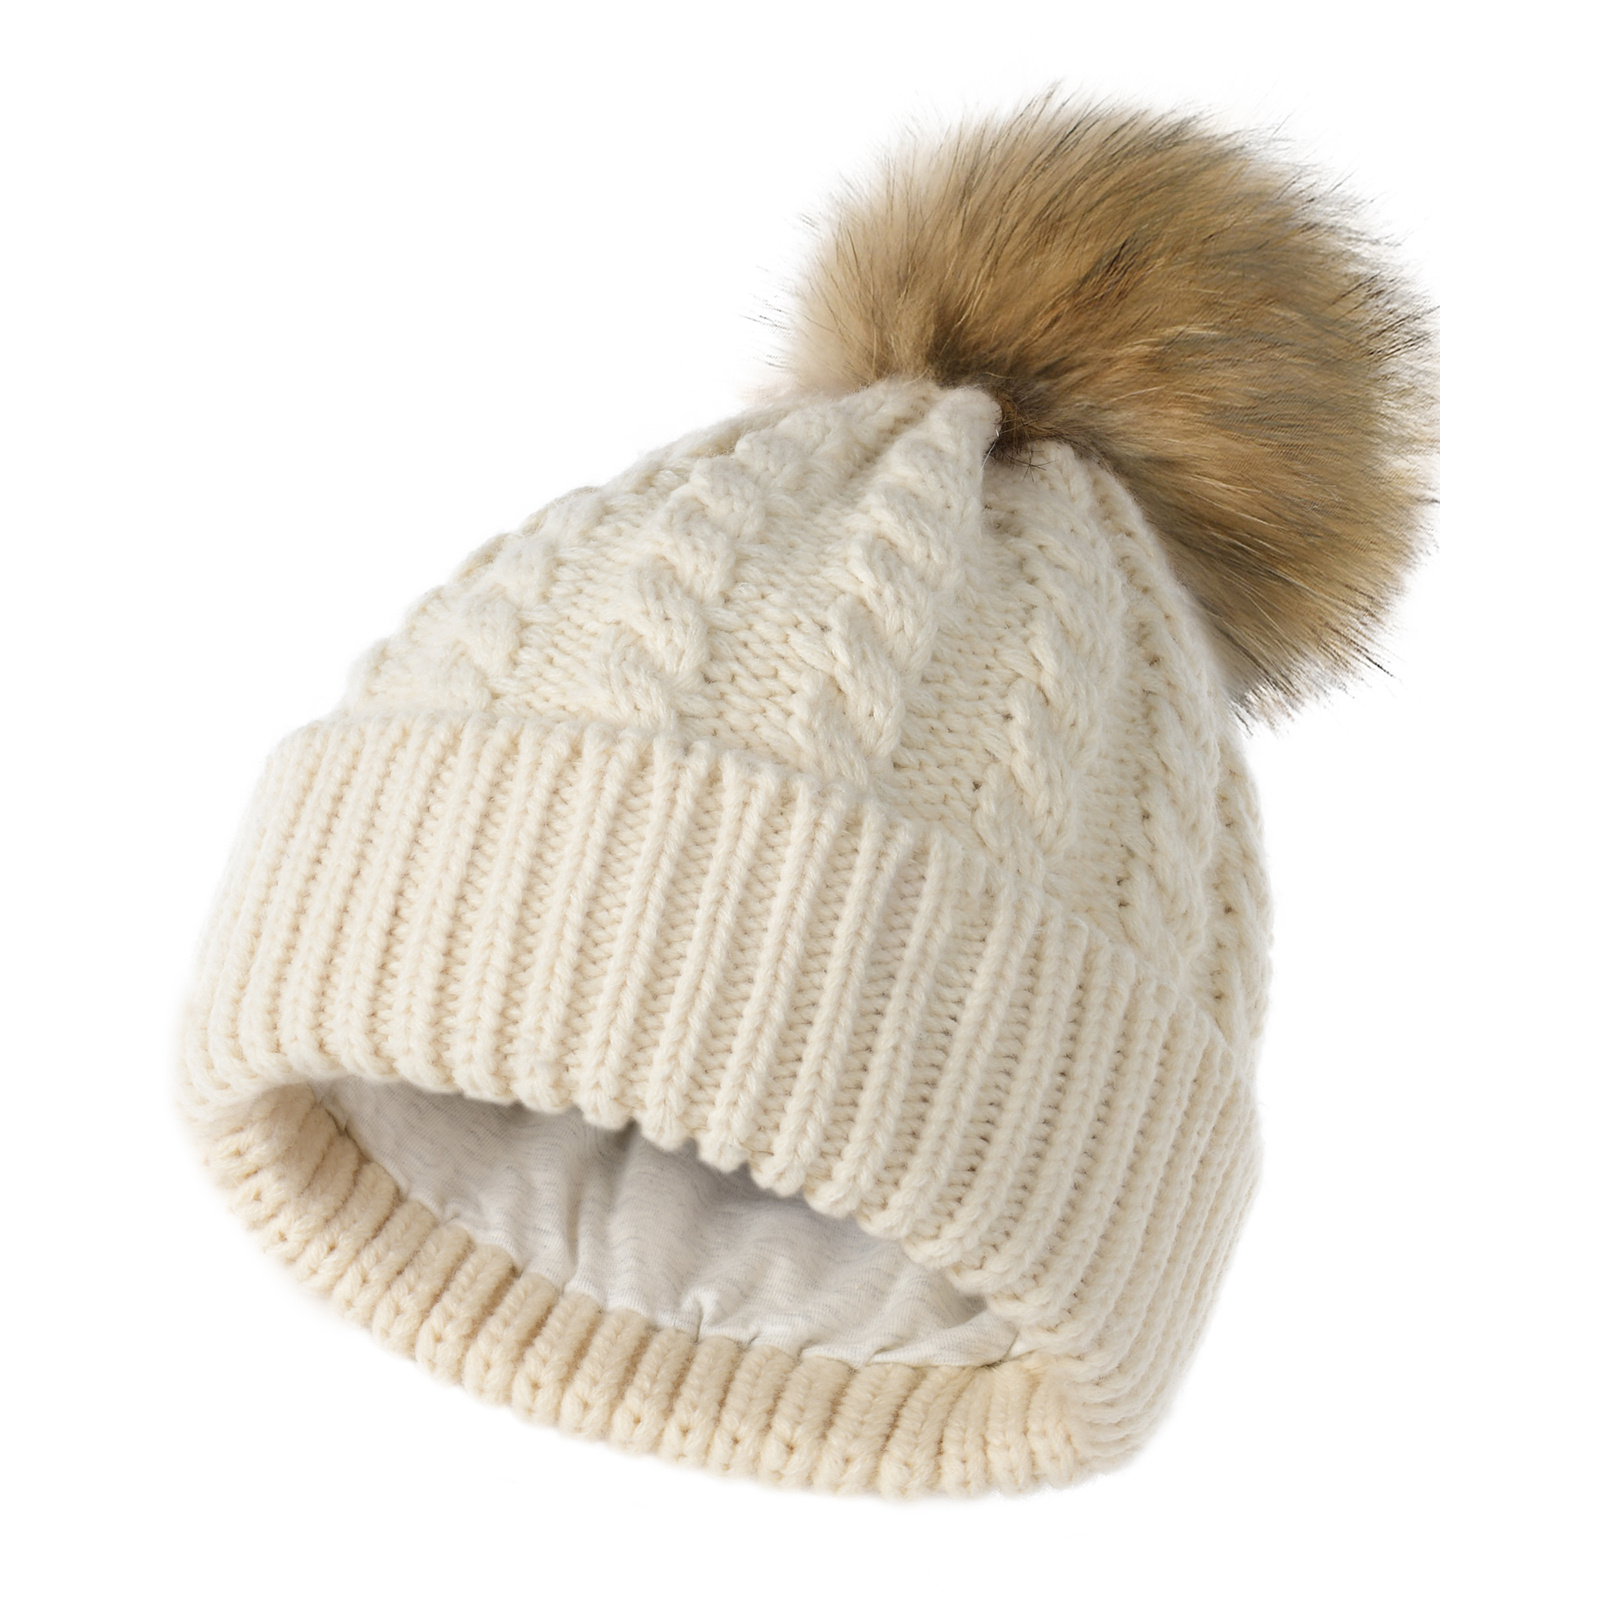 *Youth Size* Winter Beanie W/Raccoon Fur Pom-Pom - Extra Warm Lined Interior Long Knit Thick Ribbed Cuffed Soft Youth Beanie Hat - 5368